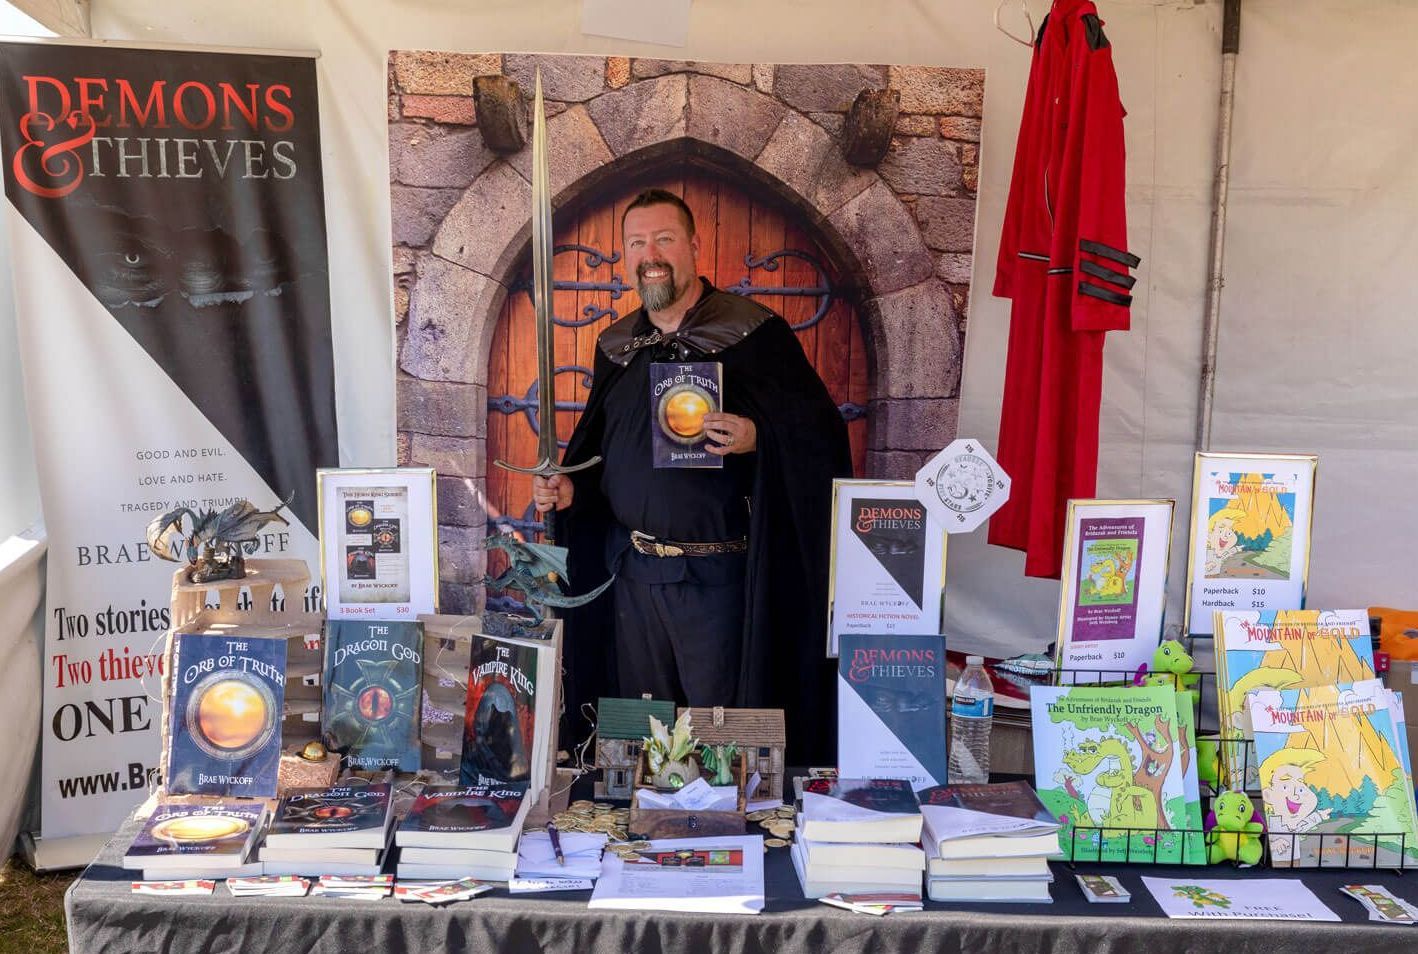 Author in costume holding a sword and promoting books. Text: Author booths